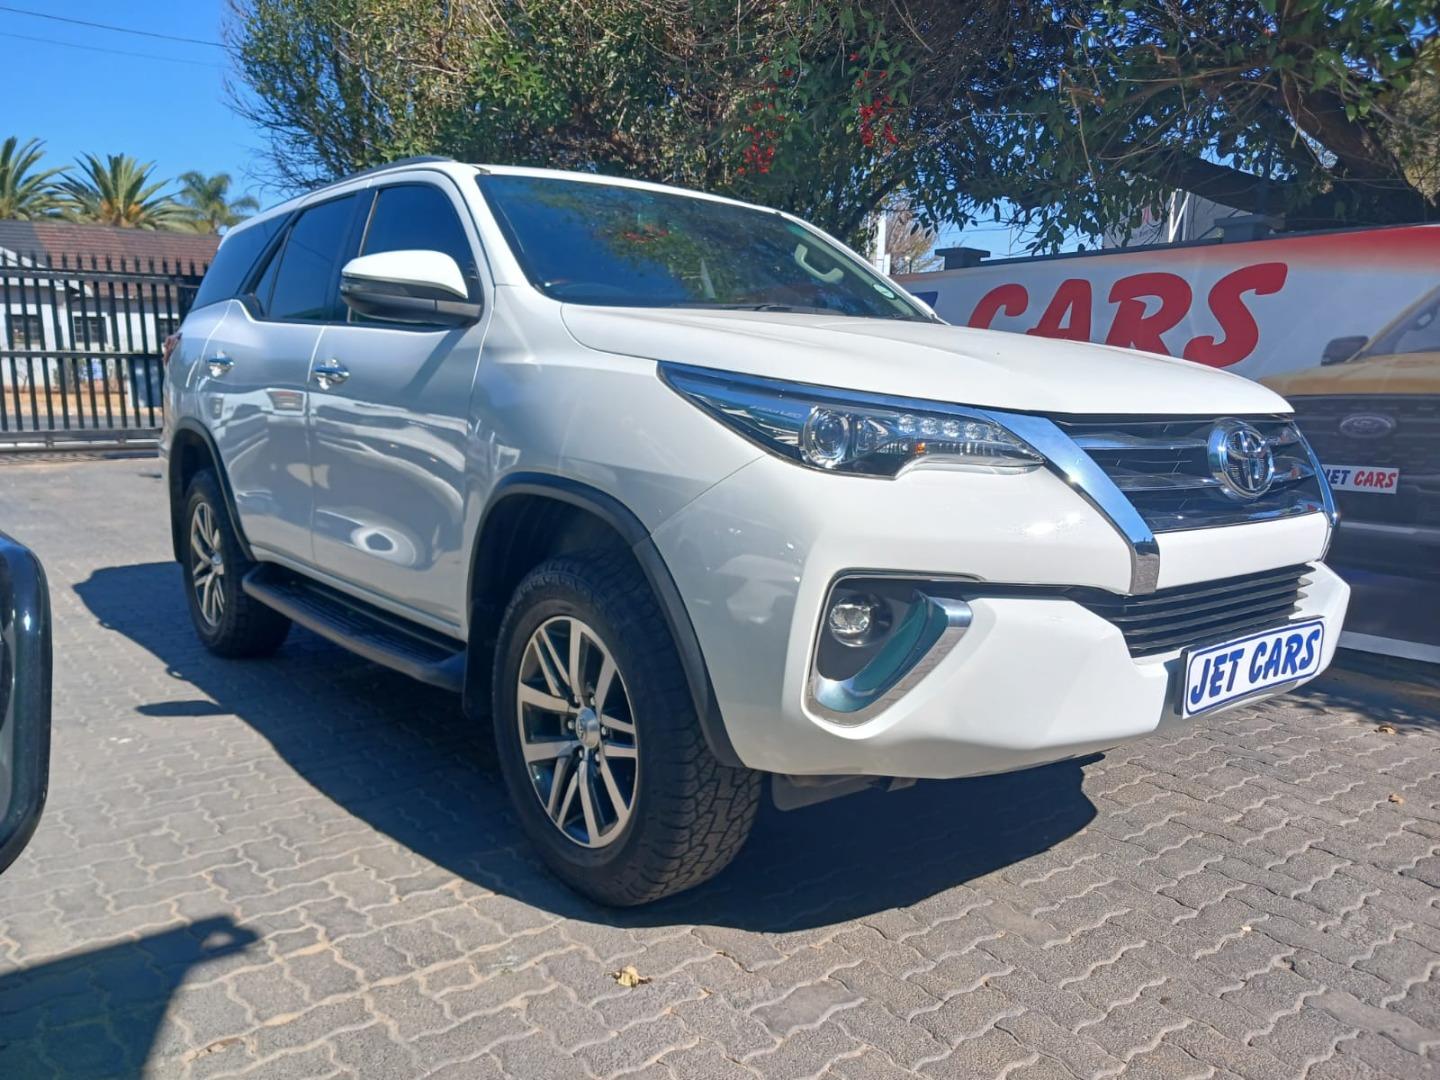 2017 Toyota Fortuner 2.4GD-6 4x4 Auto For Sale